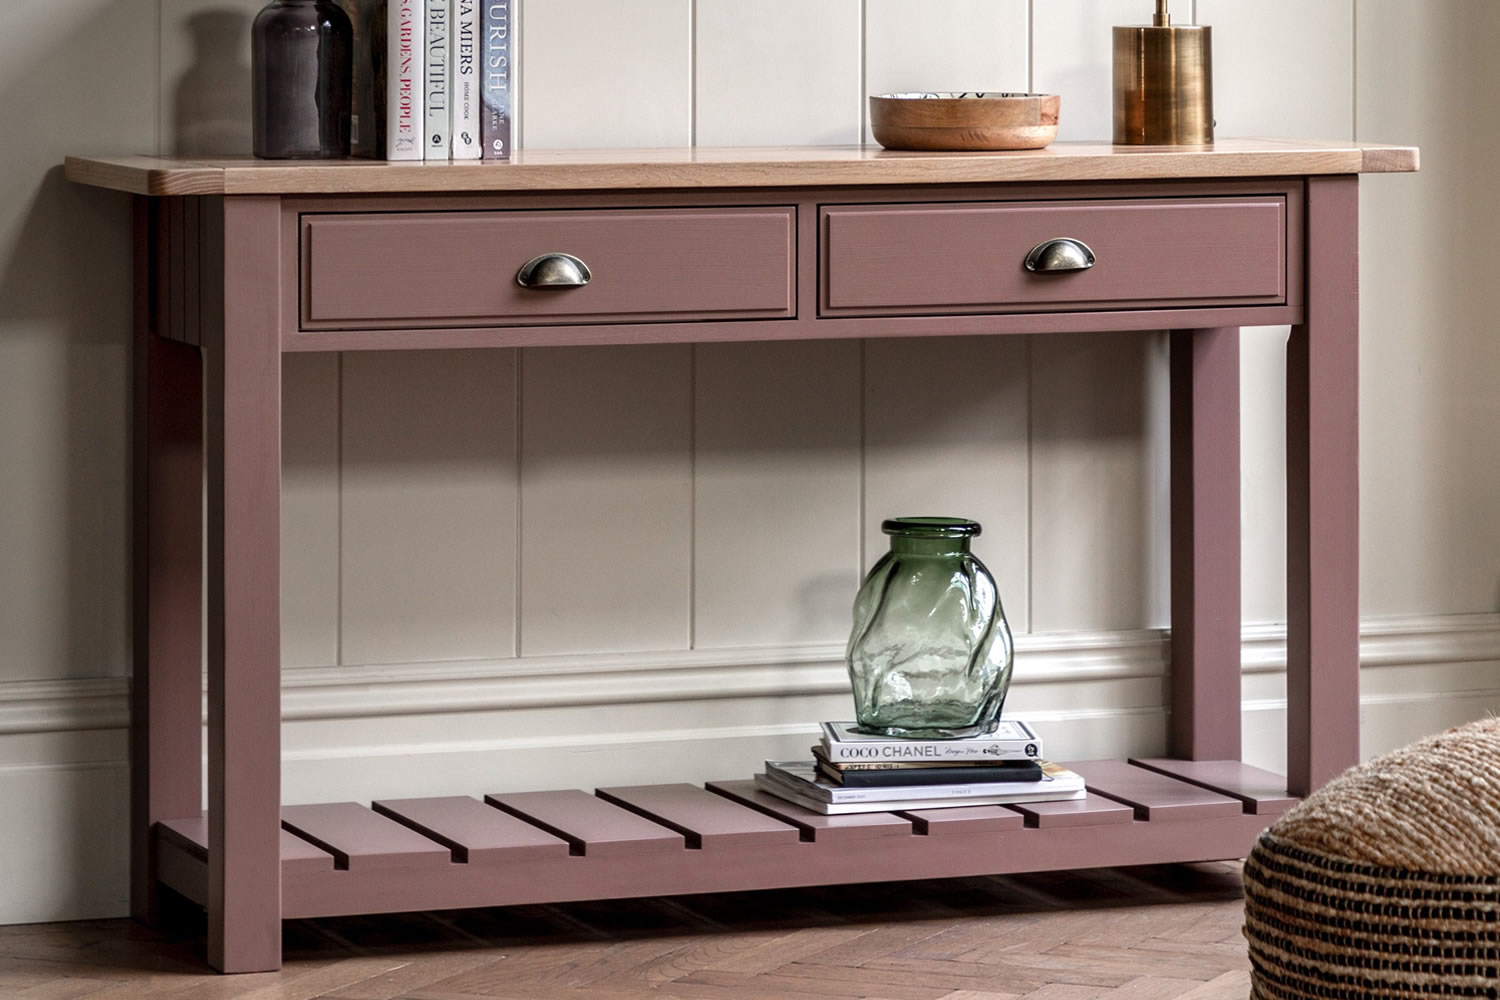 View Eton Clay 2Drawer Hallway Console Table Oak Pine MDF Matte Finish Spacious Drawers Lower Storage Shelf Metal Handles Easy Assembly information